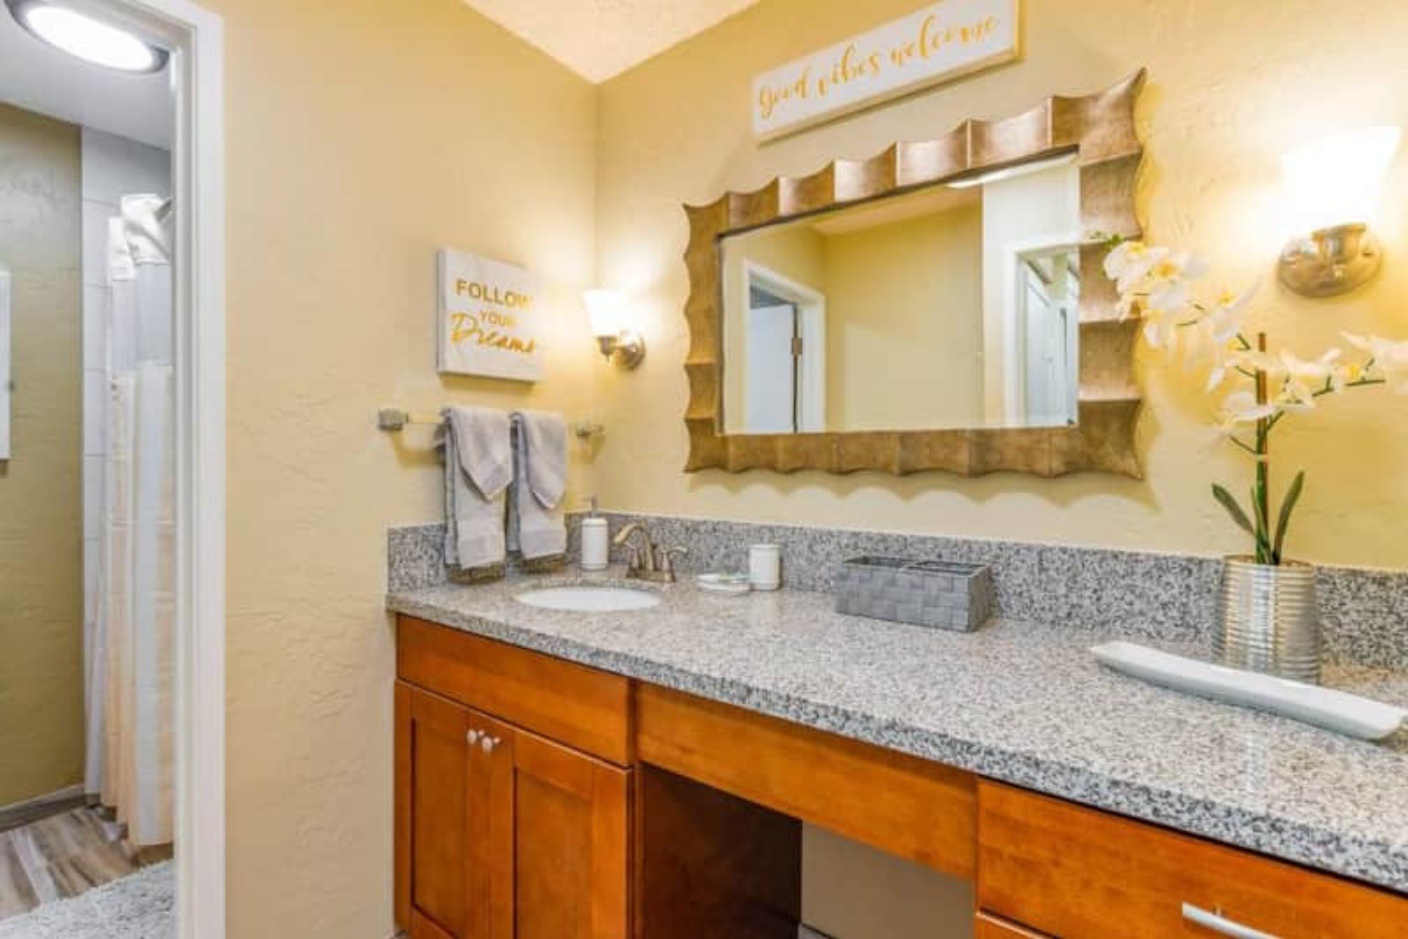 Kapaa Vacation Rentals, Kahaki Hale - Bathroom provides a large vanity with storage and great lighting